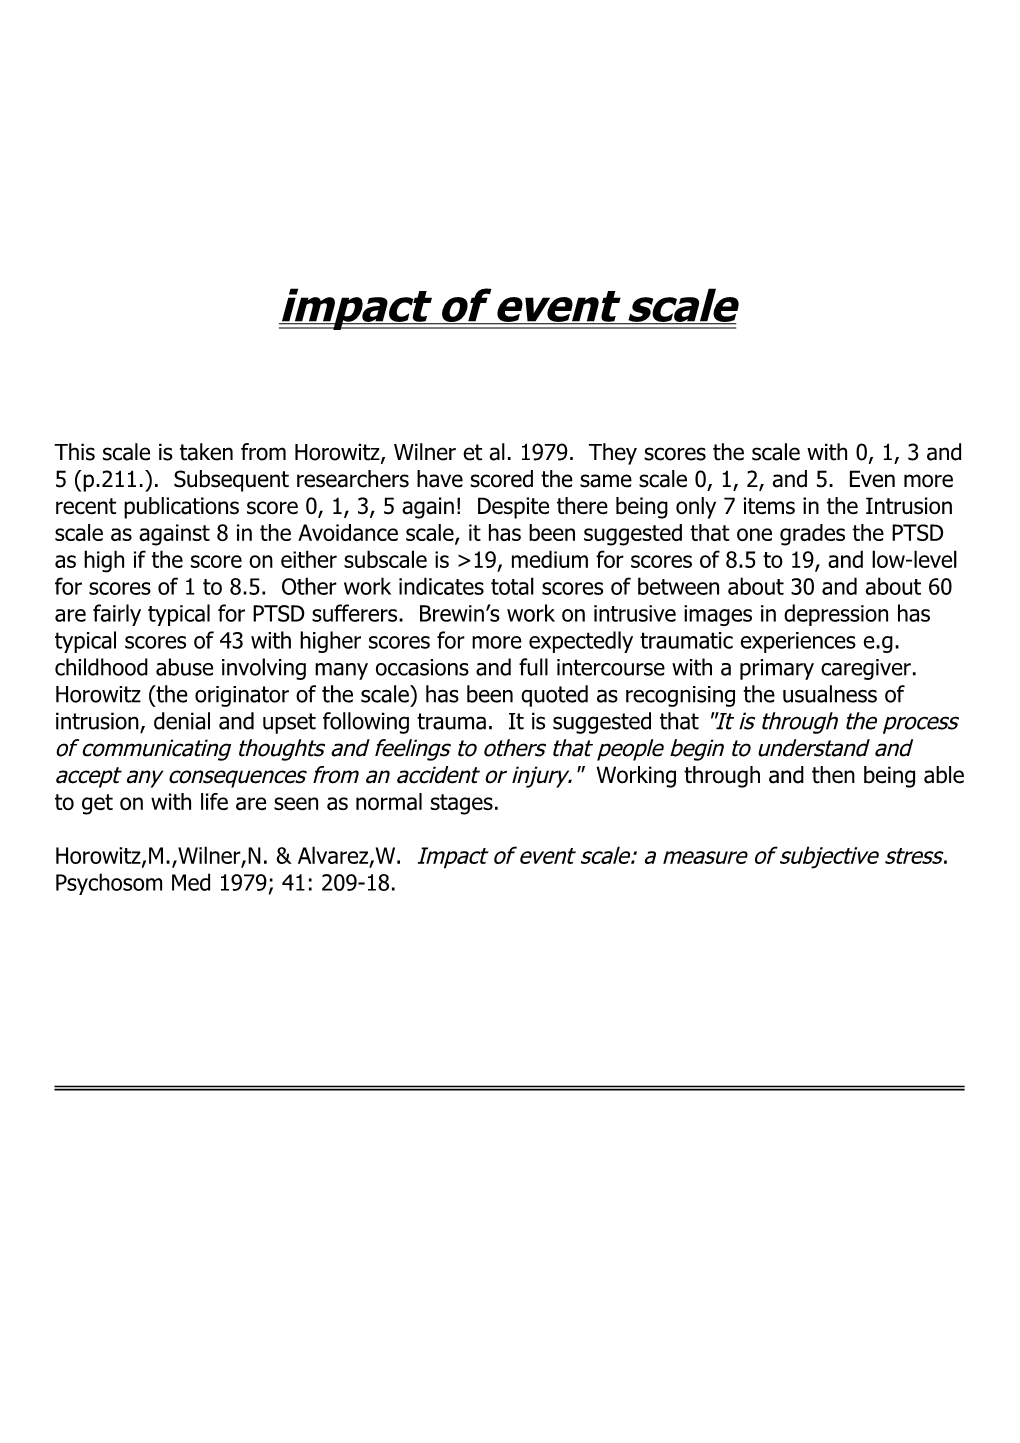 Impact of Event Scale